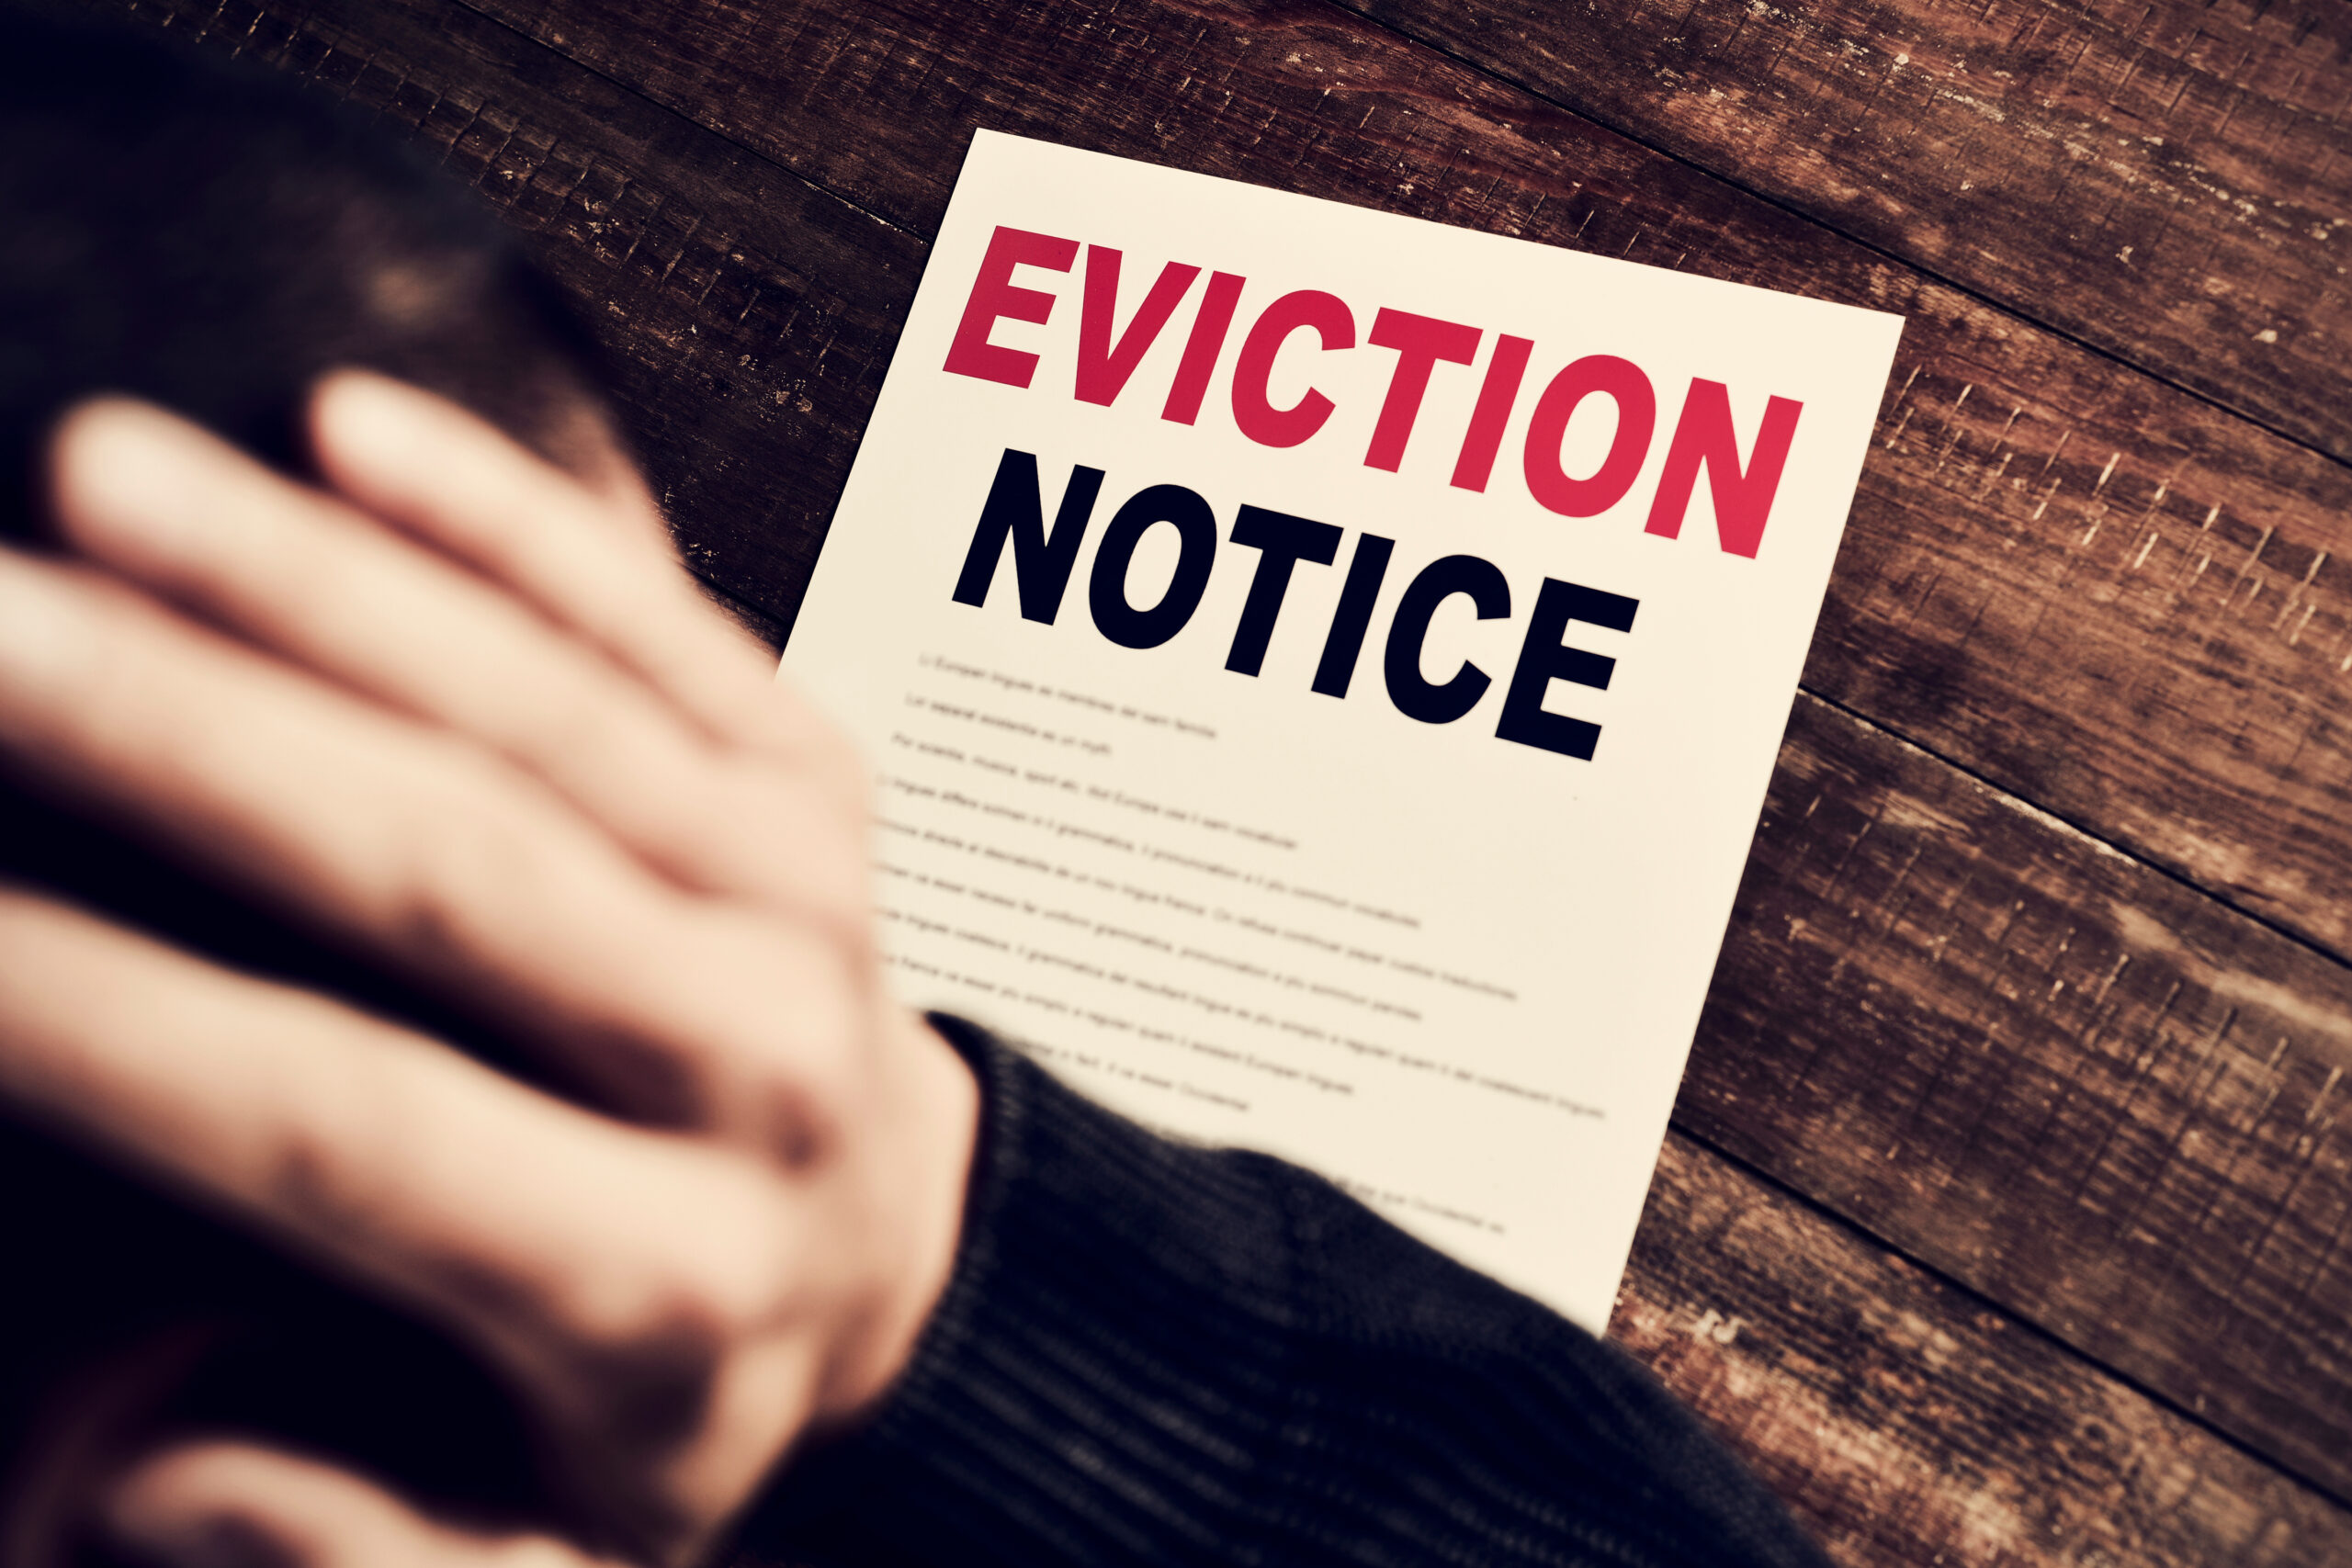 Evictions can kill: how US communities are trying to break the cycle of violence